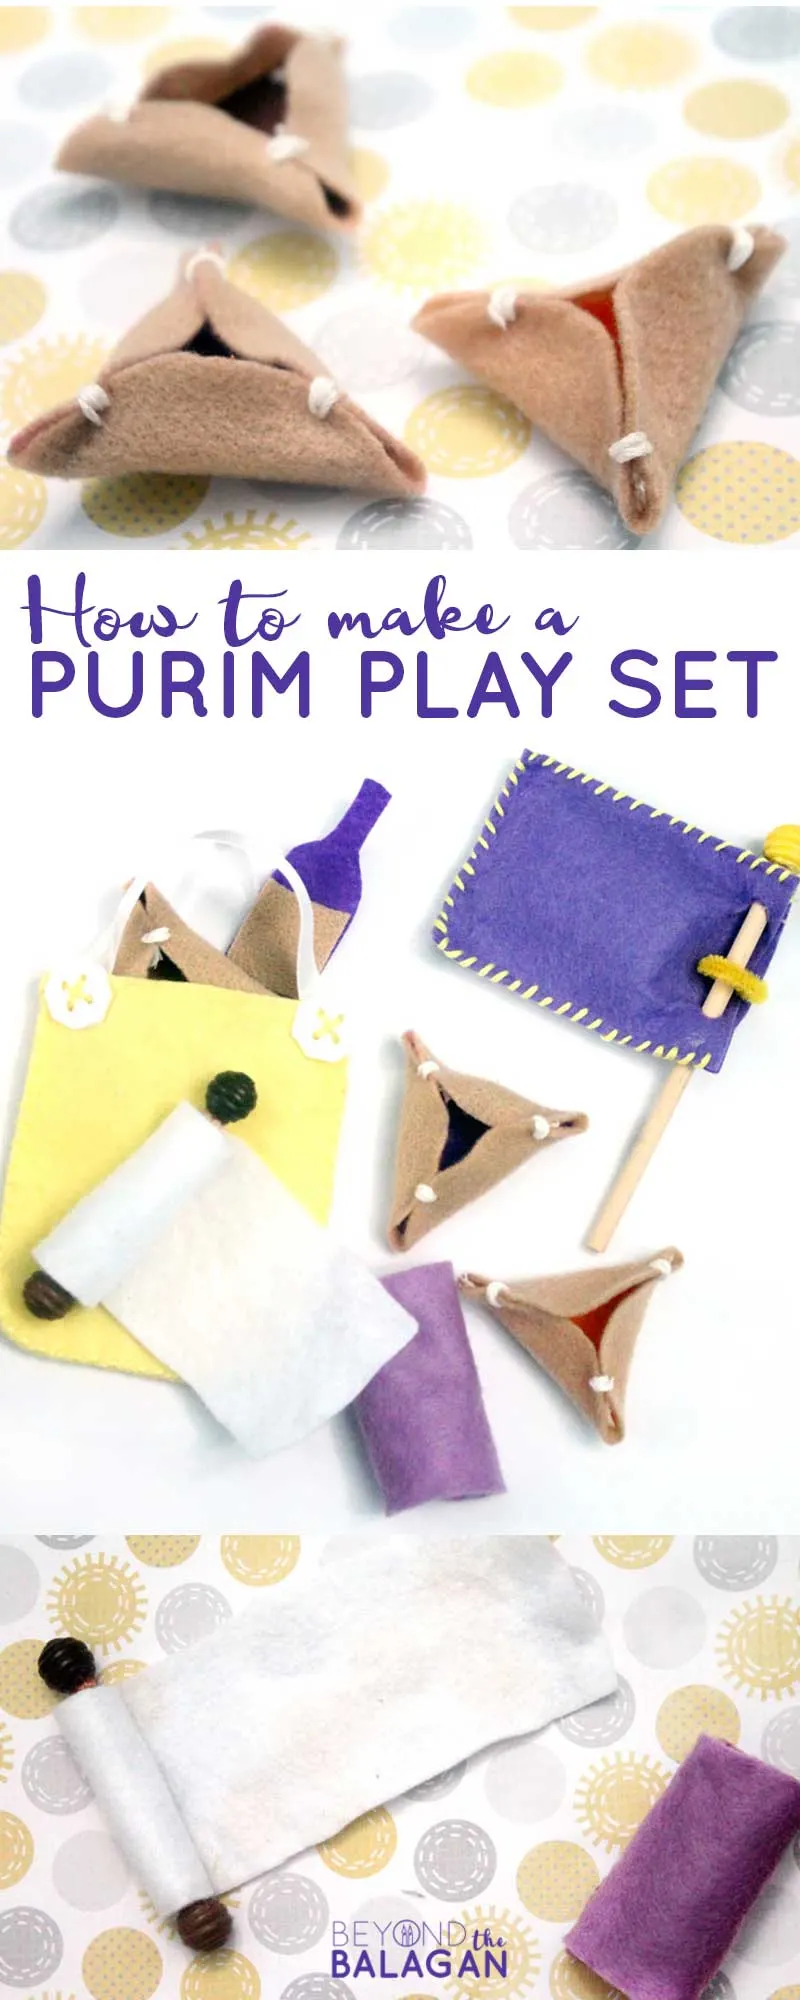 This adorable felt purim toy is easy to make yourself! Includes DIY pretend hamantashen and more, perfect craft for the Jewish holiday of Purim. #purim #hamantashen #diytoy 